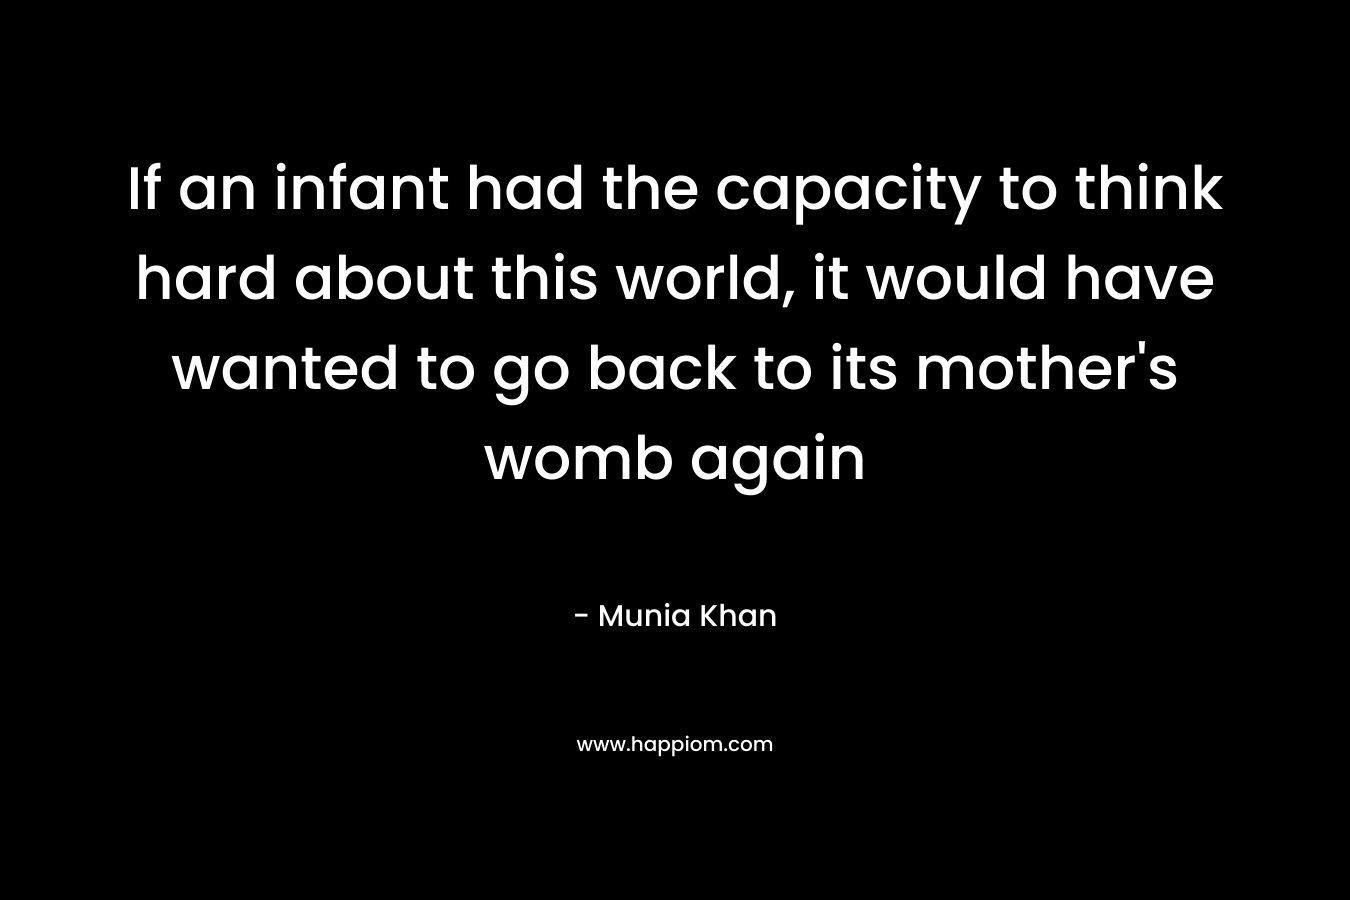 If an infant had the capacity to think hard about this world, it would have wanted to go back to its mother’s womb again – Munia Khan